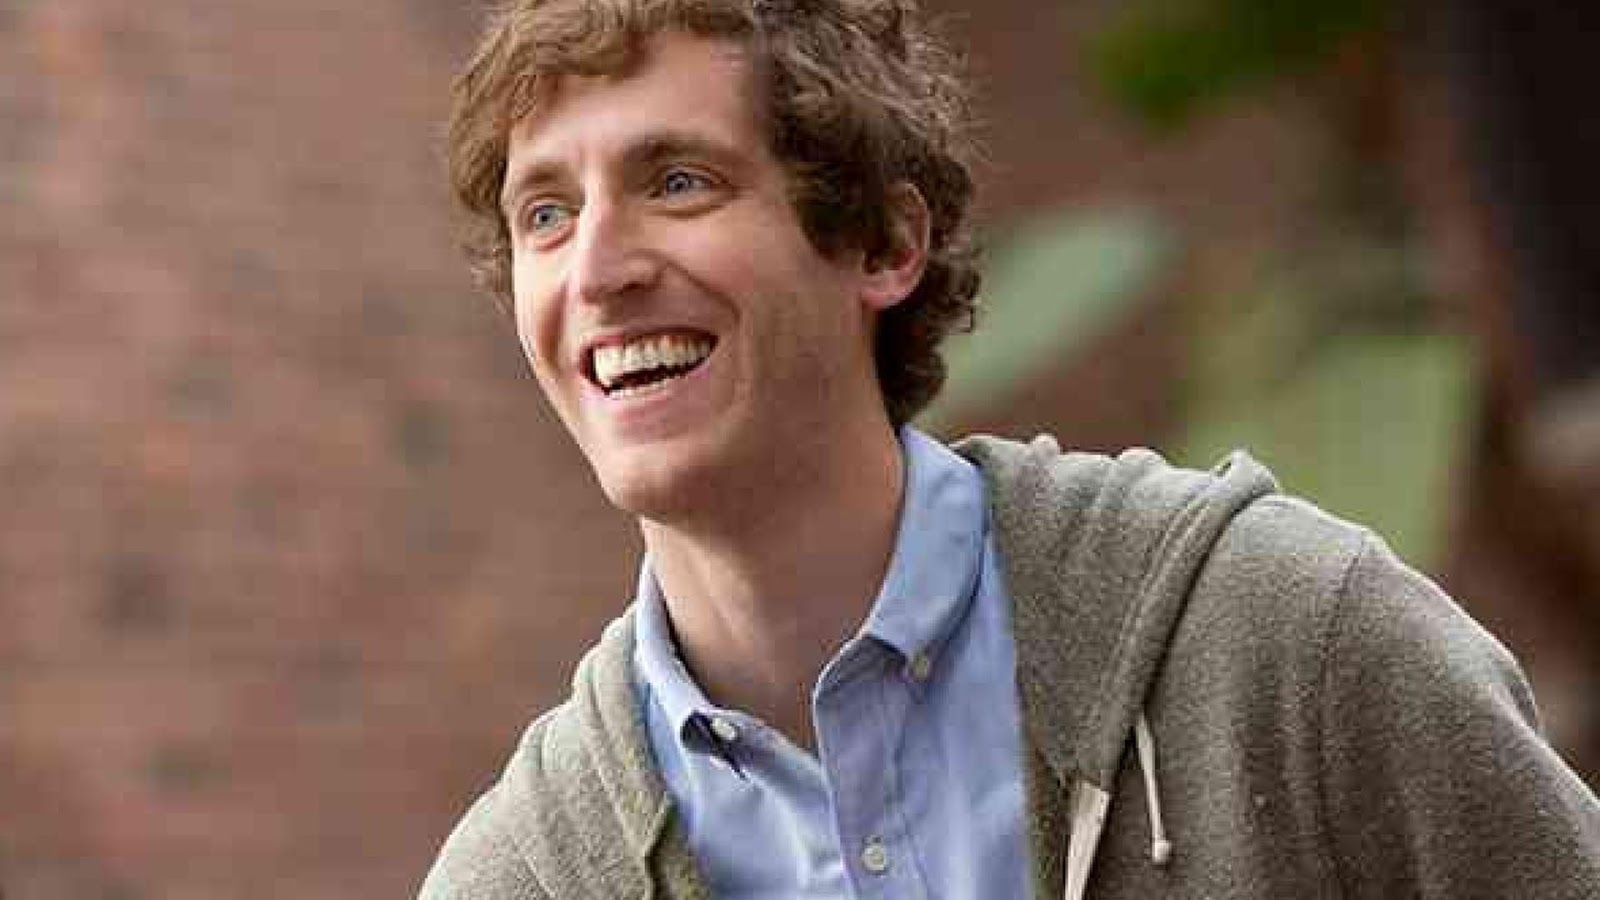 List of Actors Thomas Middleditch  new upcoming Hollywood movies in 2016, 2017 Calendar on Upcoming Wiki. Updated list of movies 2016-2017. Info about films released in wiki, imdb, wikipedia.